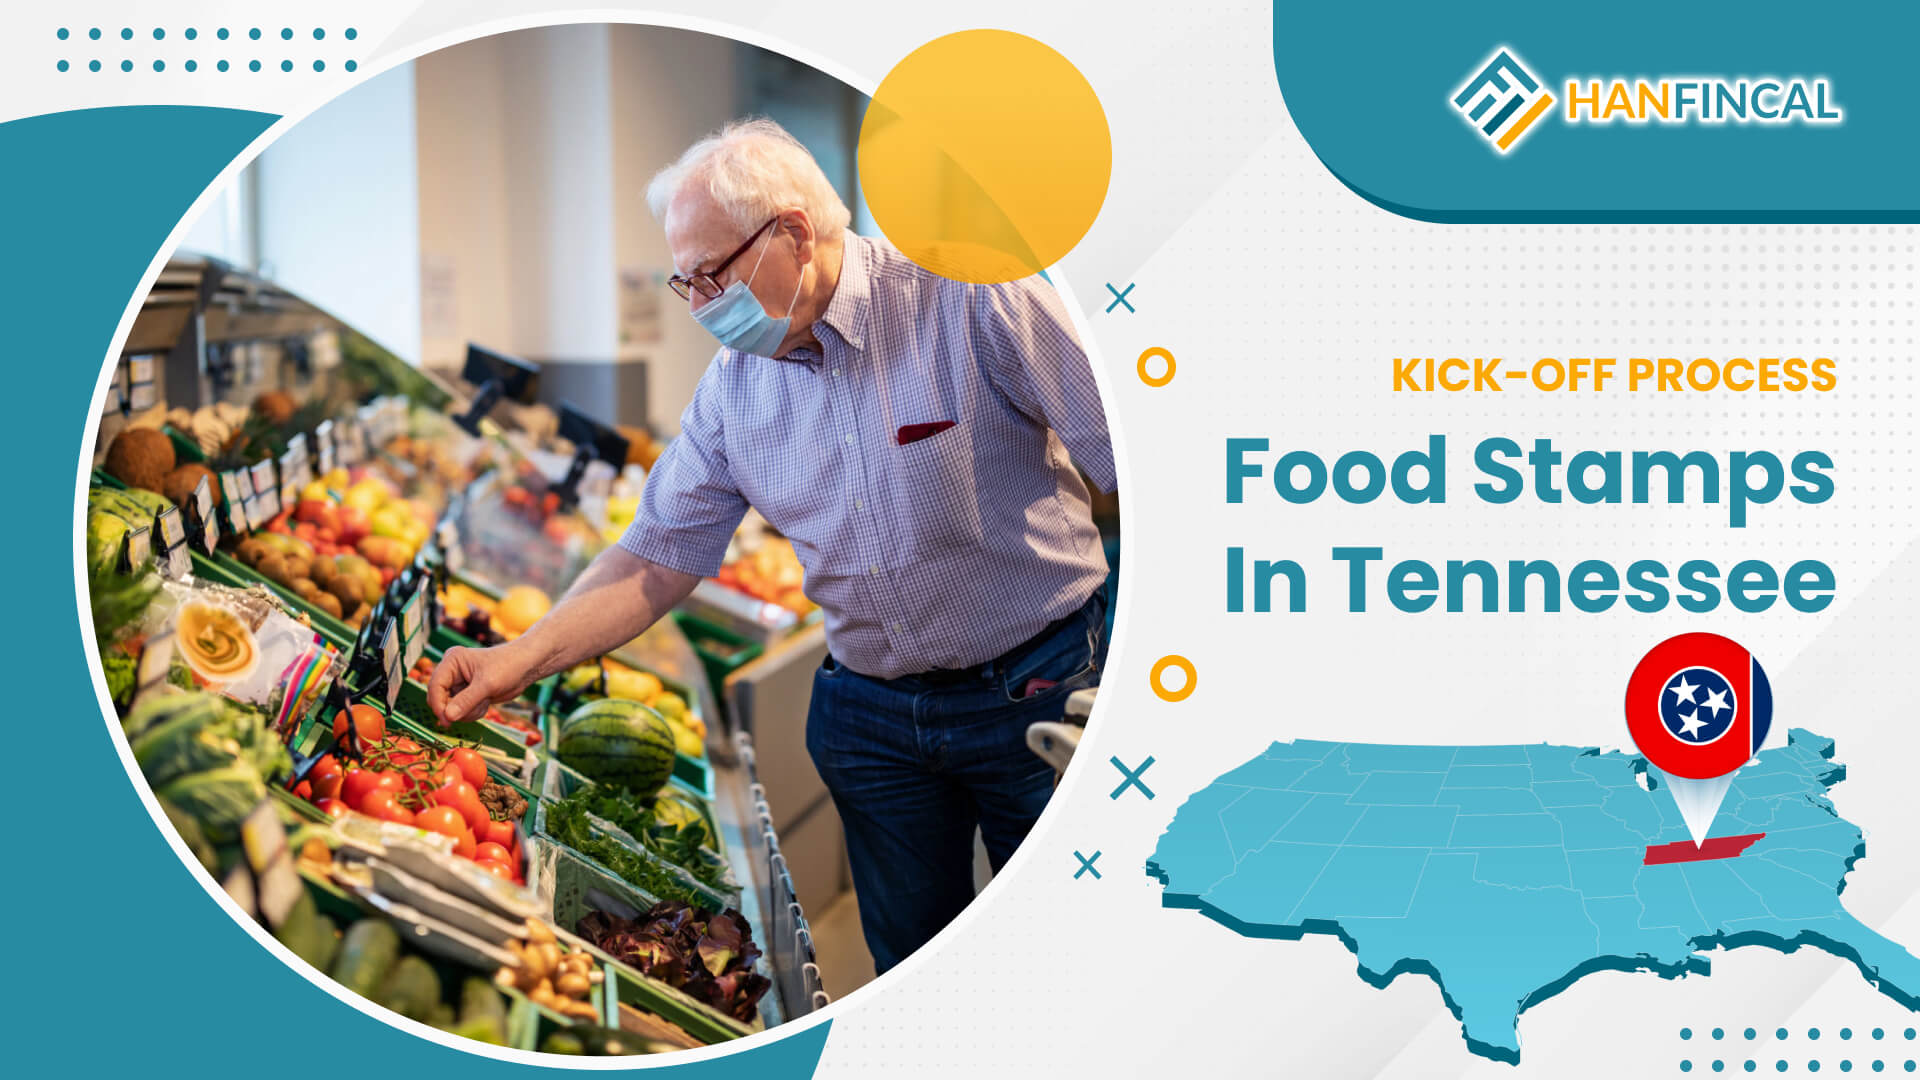 How to apply for Food Stamps in Tennessee (02/2023)? Hanfincal